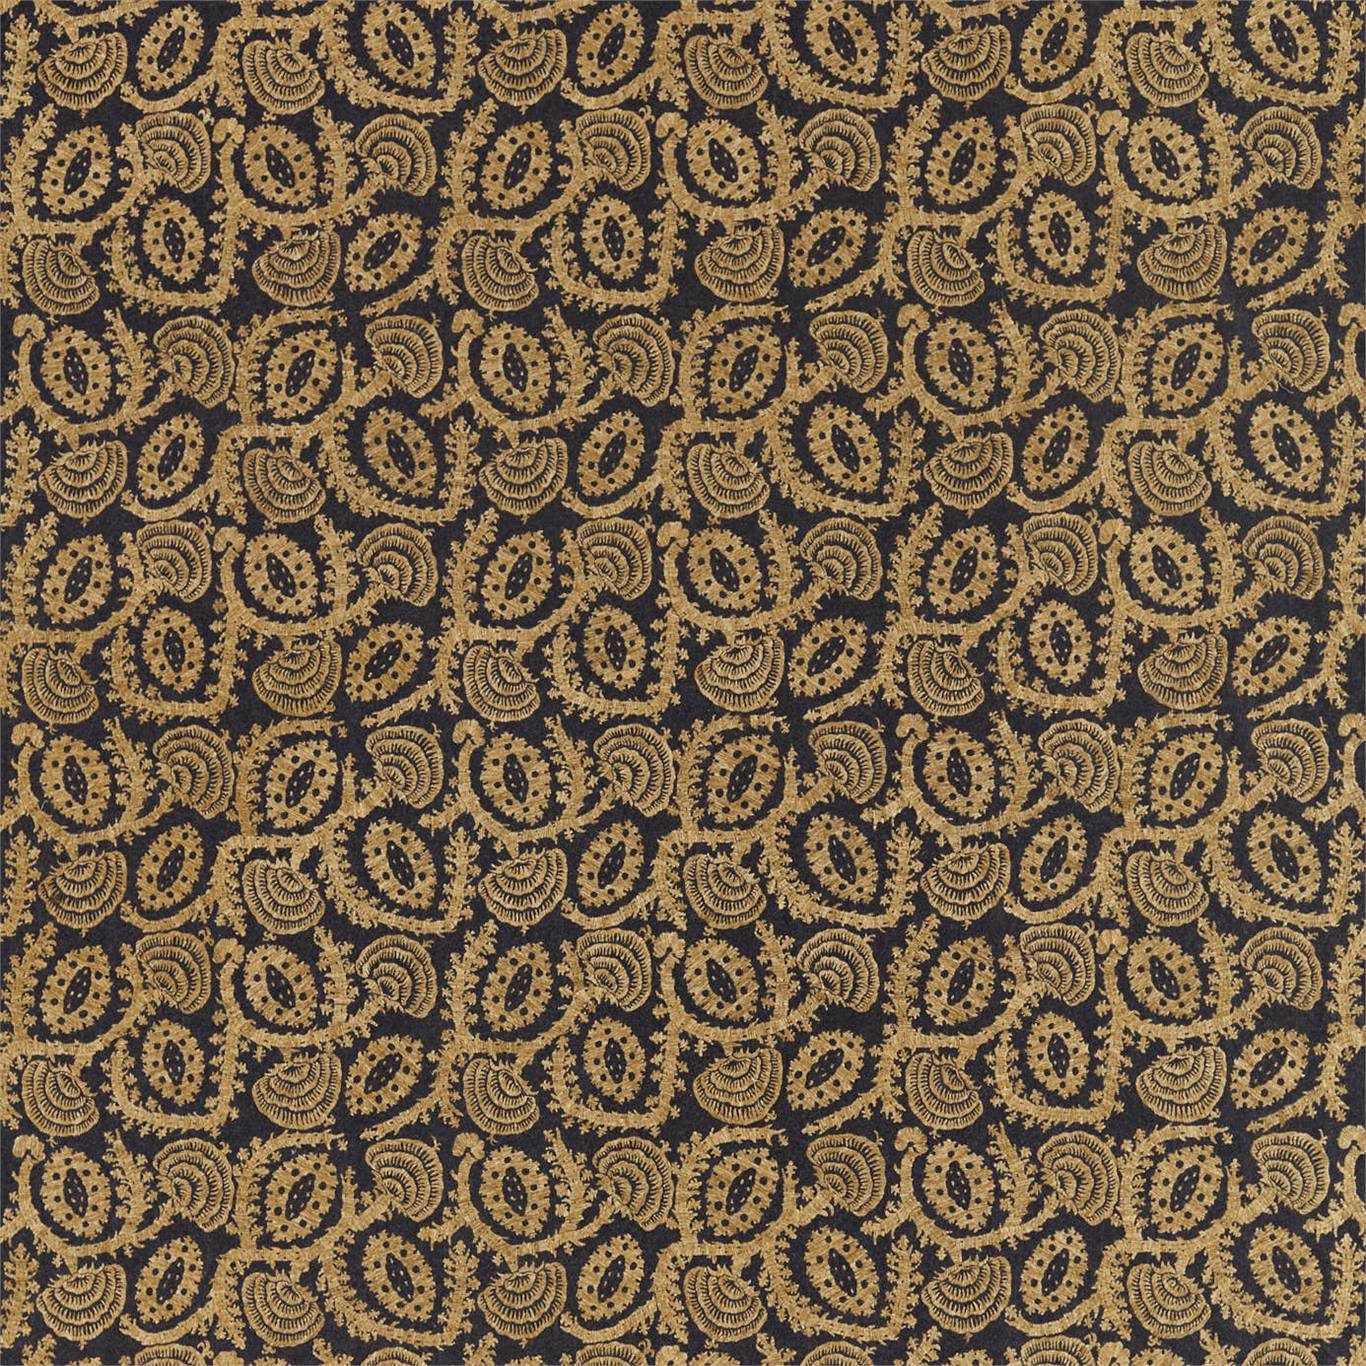 Suzani Embroidery Antique Gold/Vine Black Fabric by ZOF